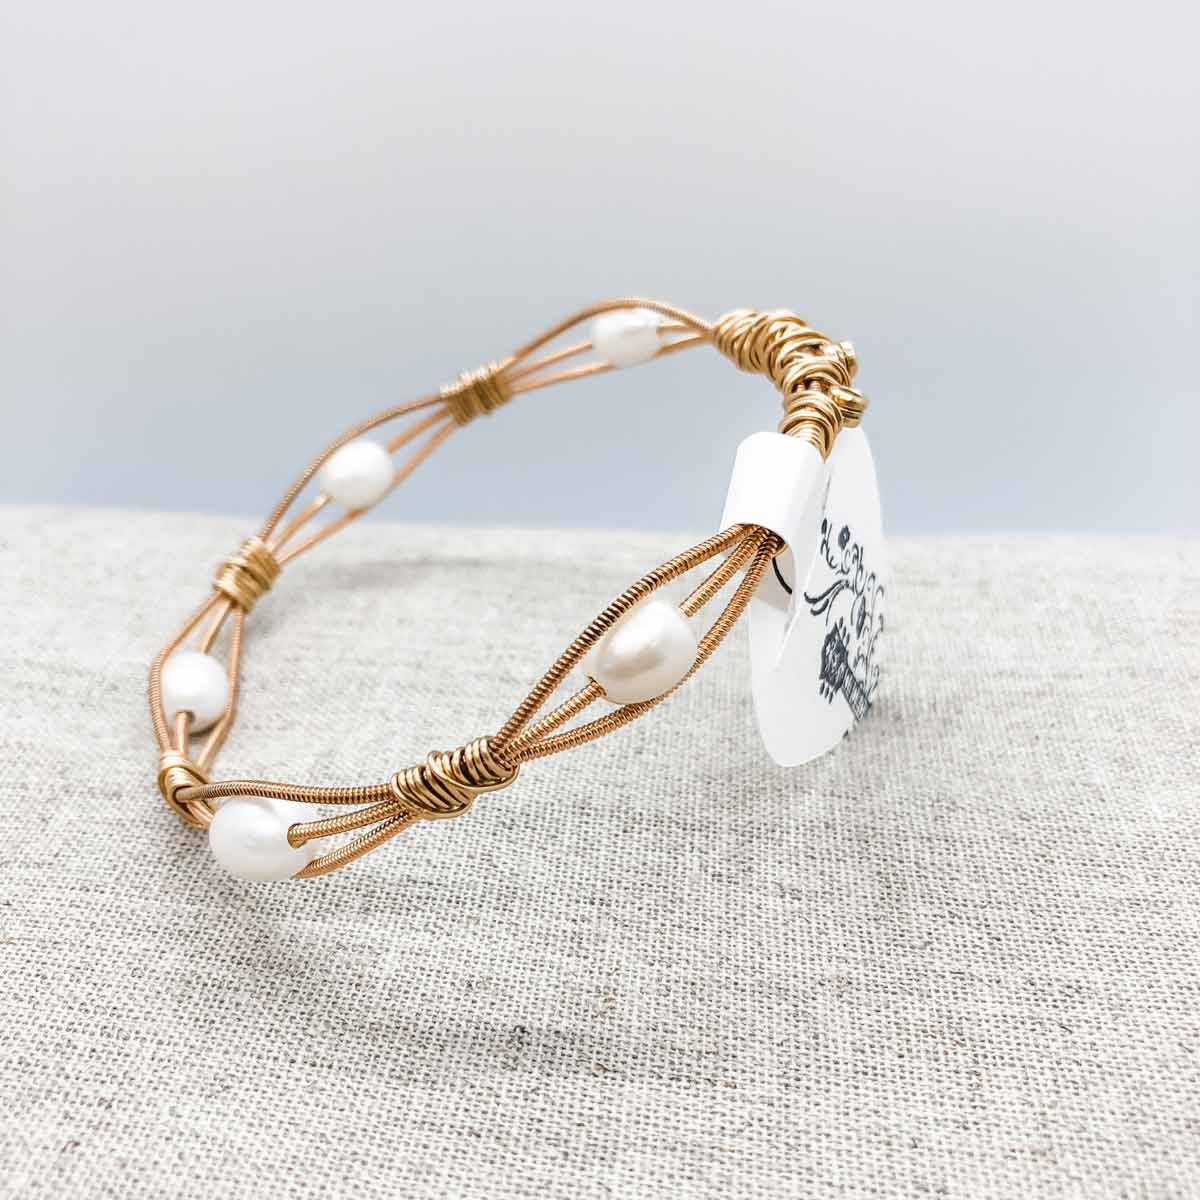 Bangle variety with added beads - Gold